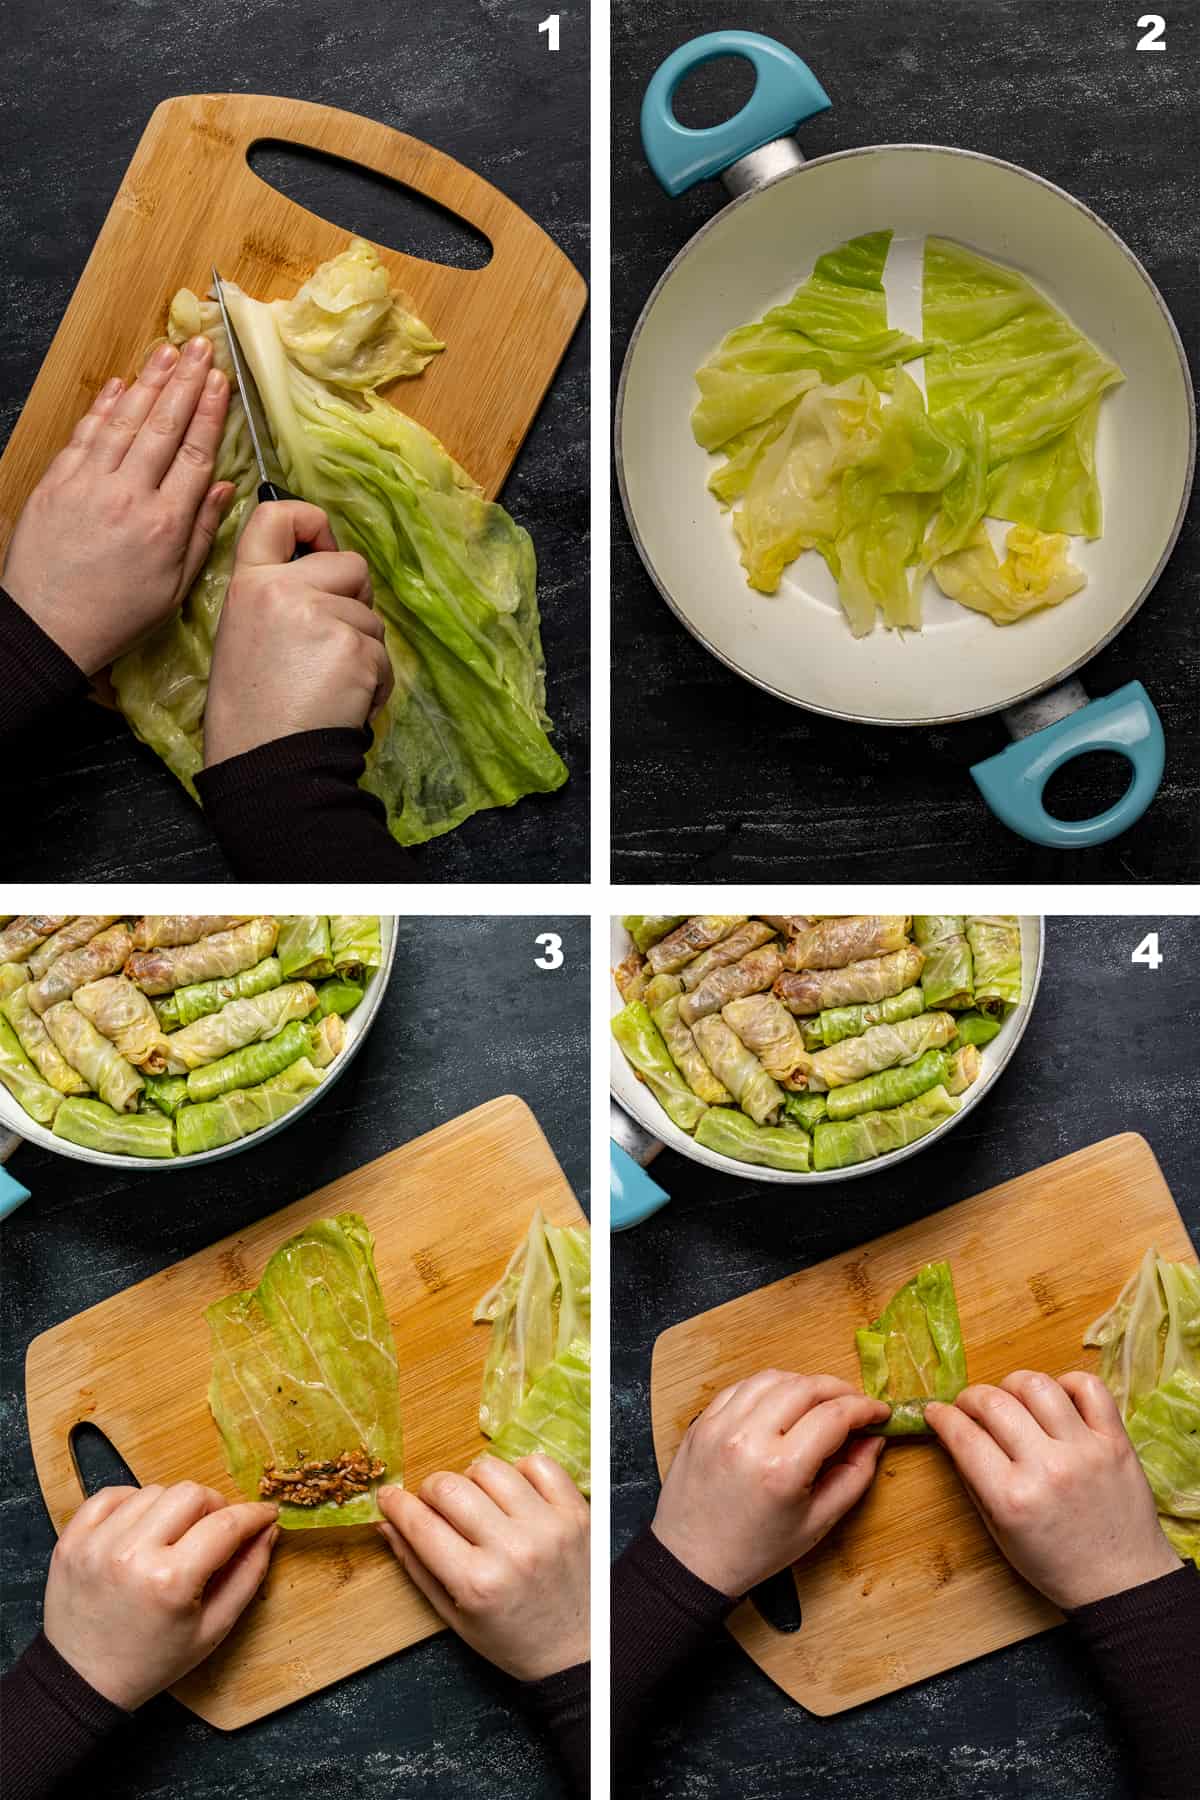 4 images showing how to make cabbage rolls.